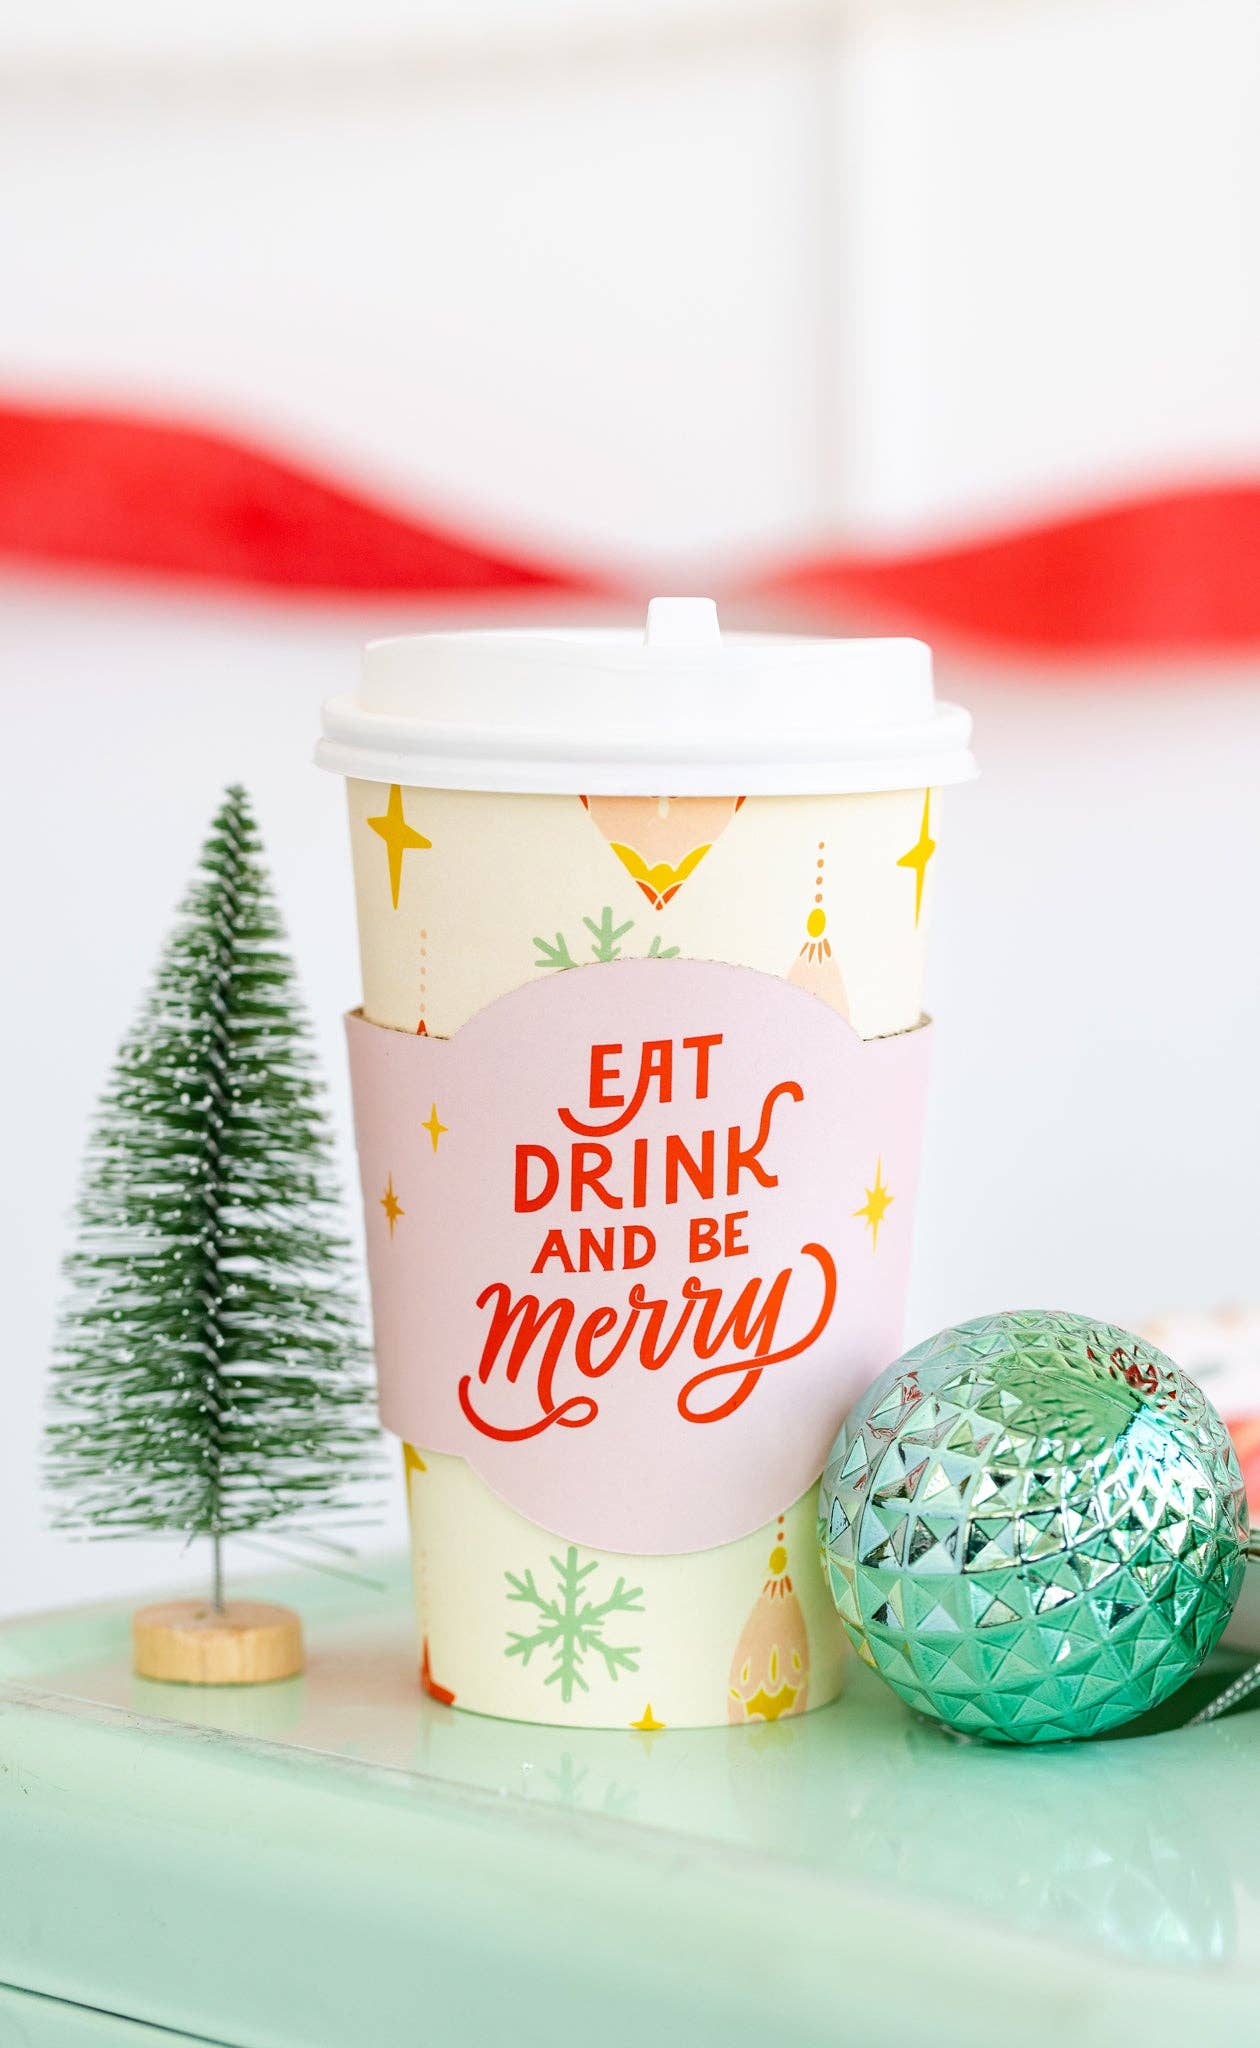 Featuring retro inspired Christmas illustrations, these festive and fun cups are the perfect companion for Christmas cocoa, when you want a cozy drink to keep up warm on snowy December nights.